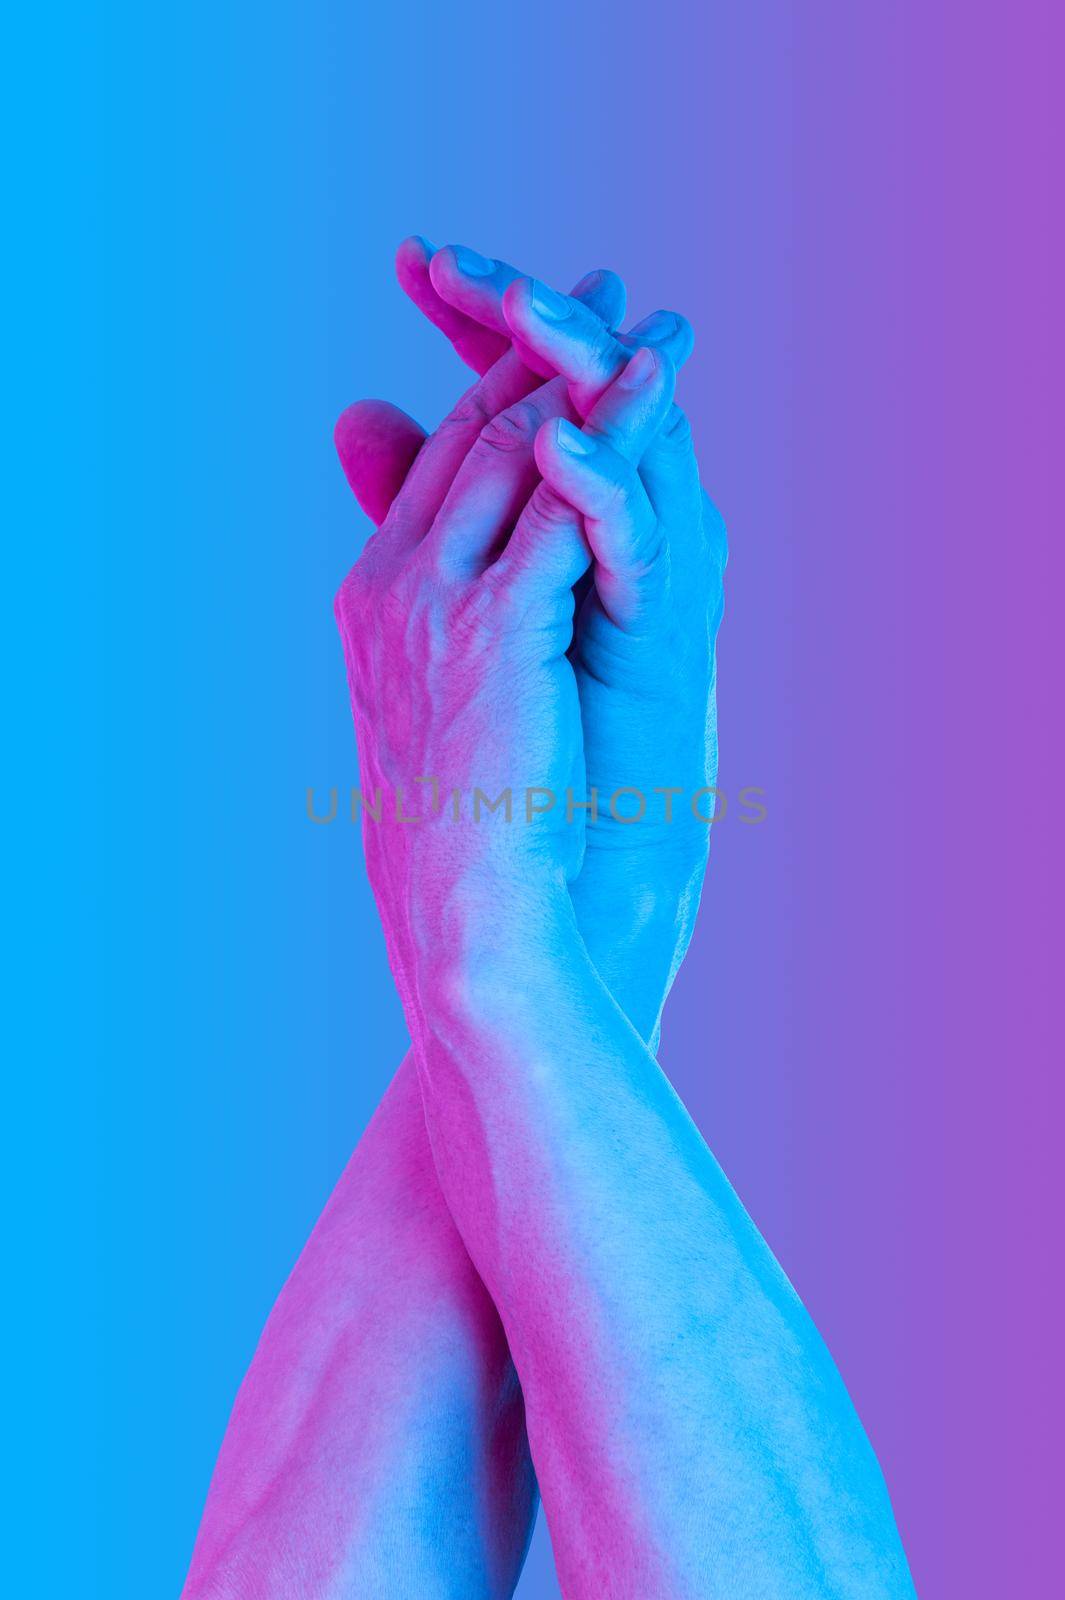 Hands in a surreal style in violet blue neon colors. Modern psychedelic creative element with human palm for posters, banners, wallpaper. Copy space for text. Magazine style template. Pop art culture. by bashta